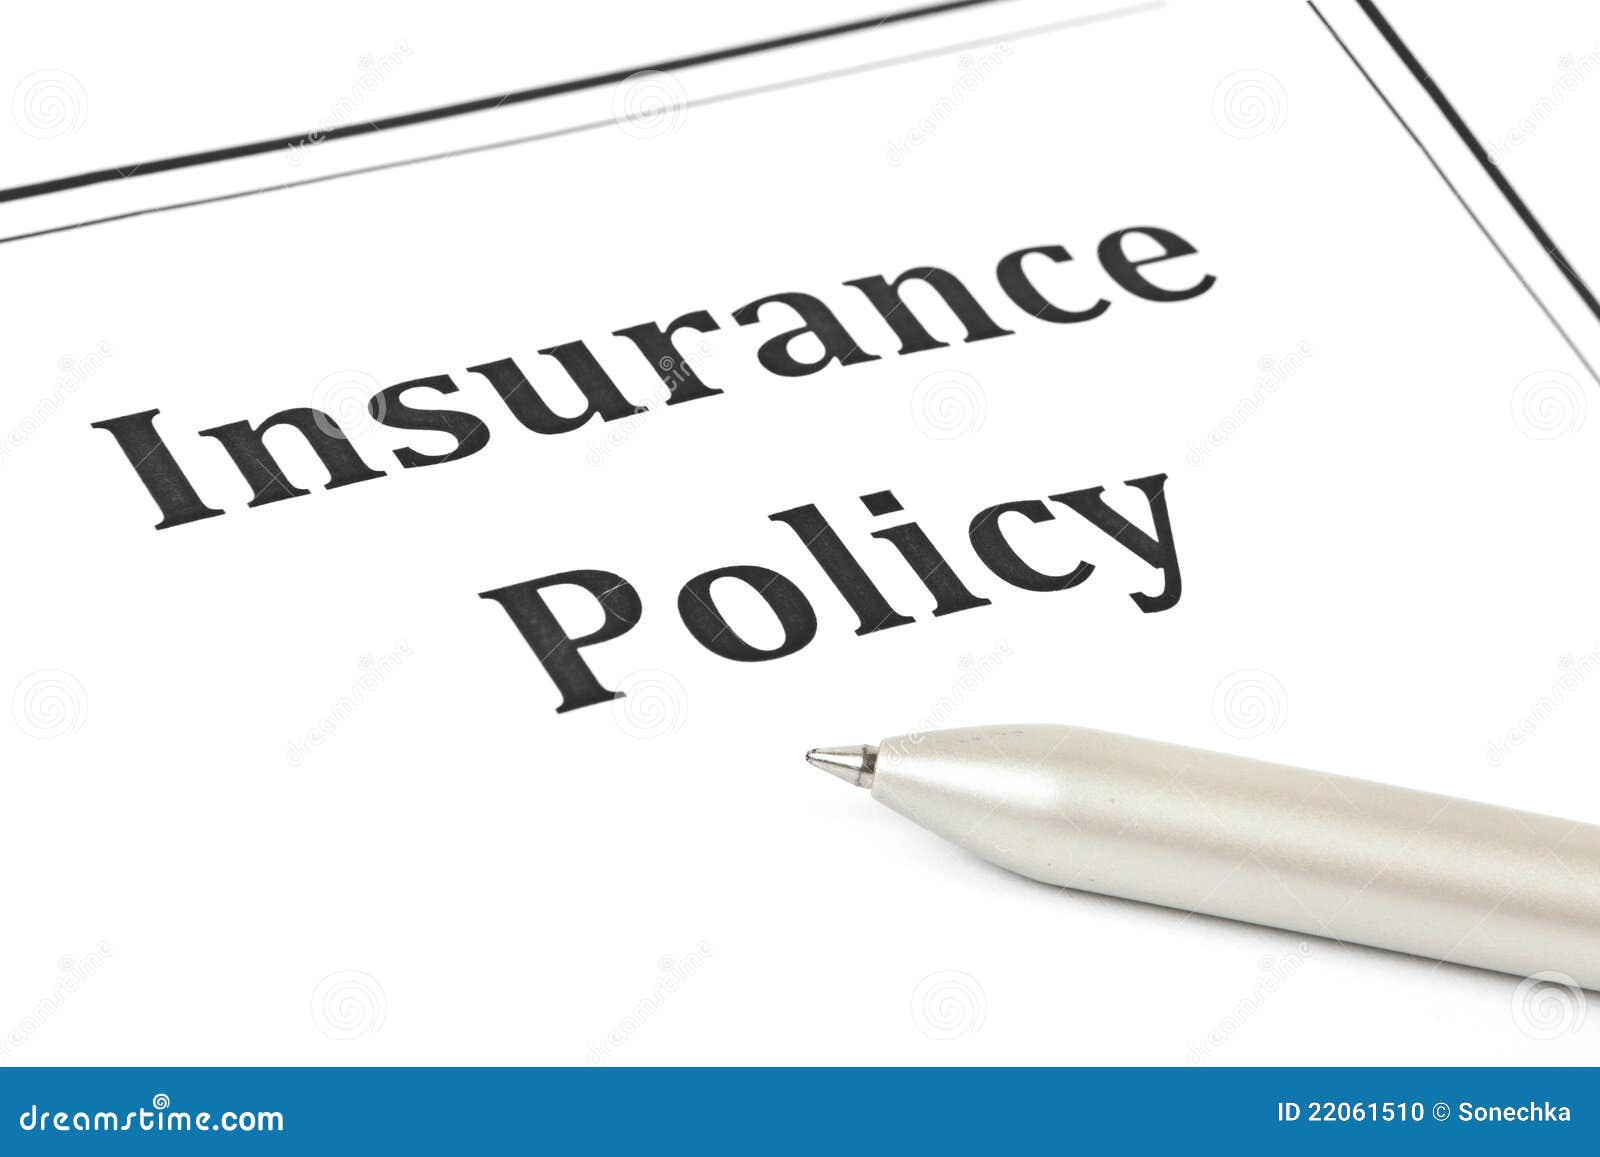 Insurance Policy Stock Photo - Image: 22061510